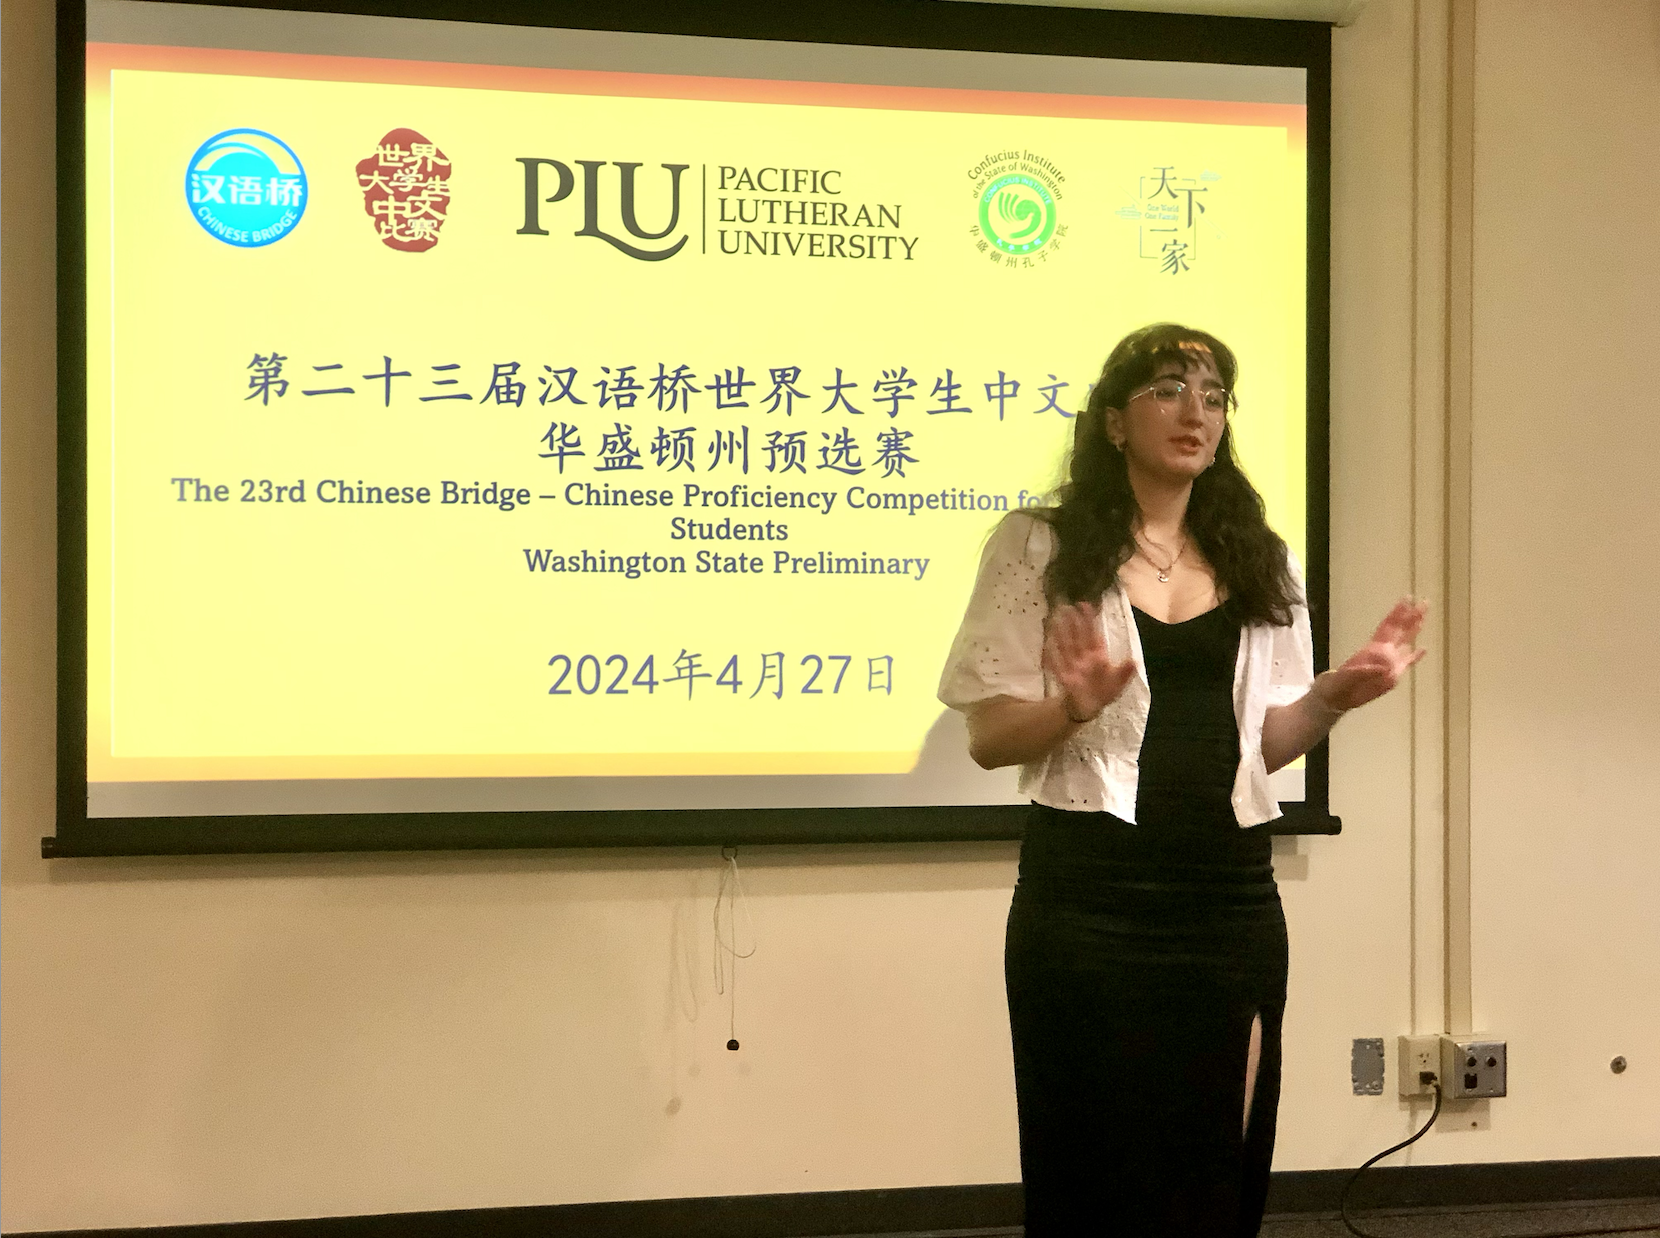 Chinese Language student, Lilly Hesari giving a speech.